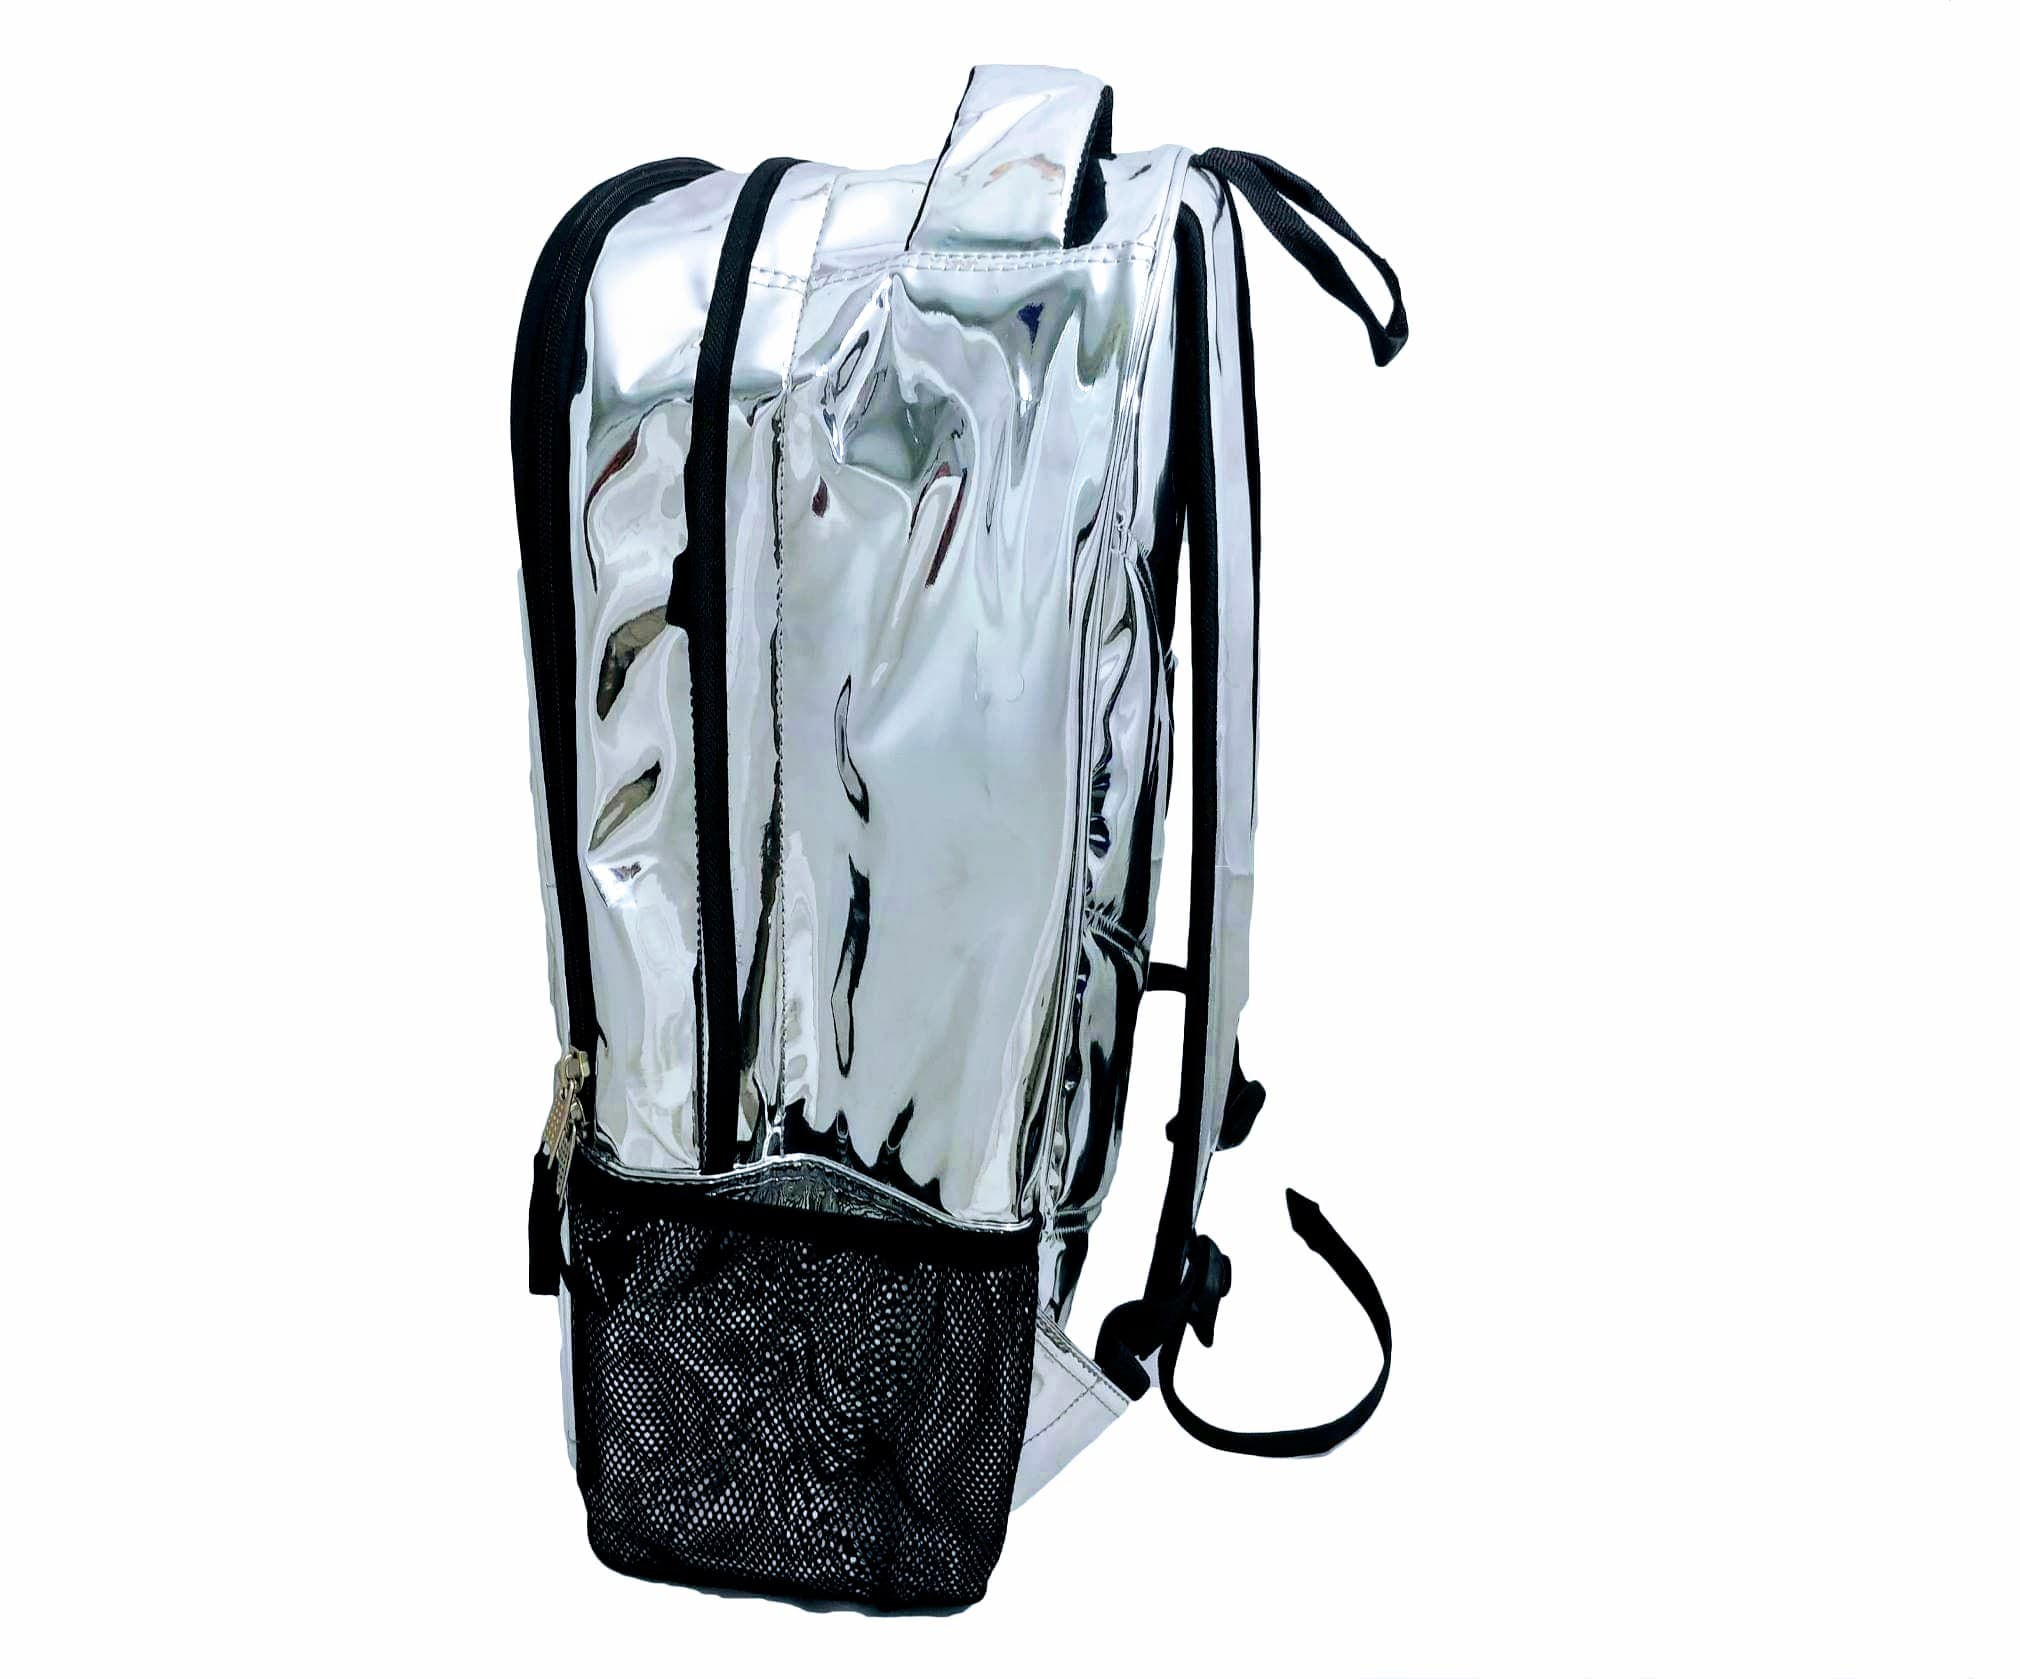 Mperial Liquid Chrome Leather Backpack